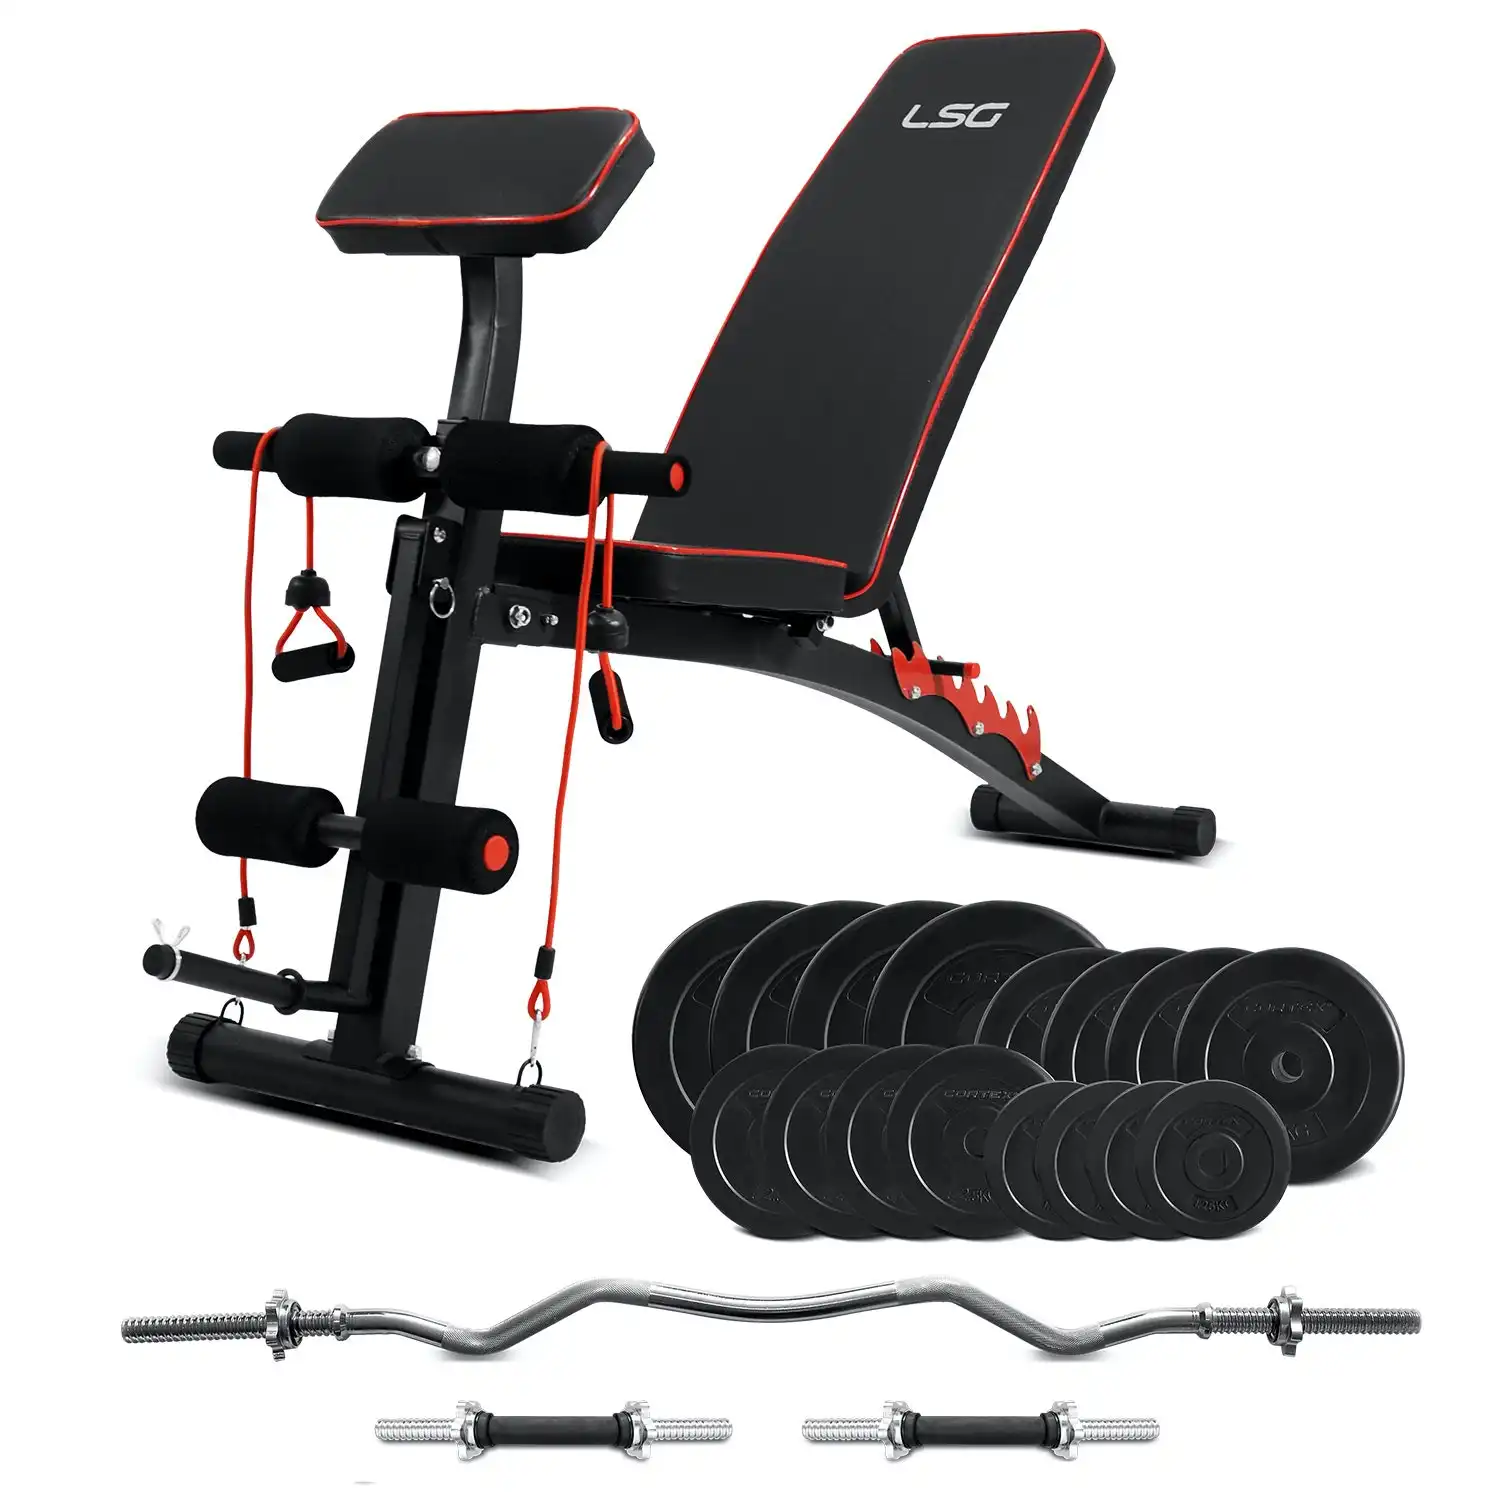 LSG GBN-007 6 Level FID Bench & Preacher Pad + 85kg Weight & Bar Package